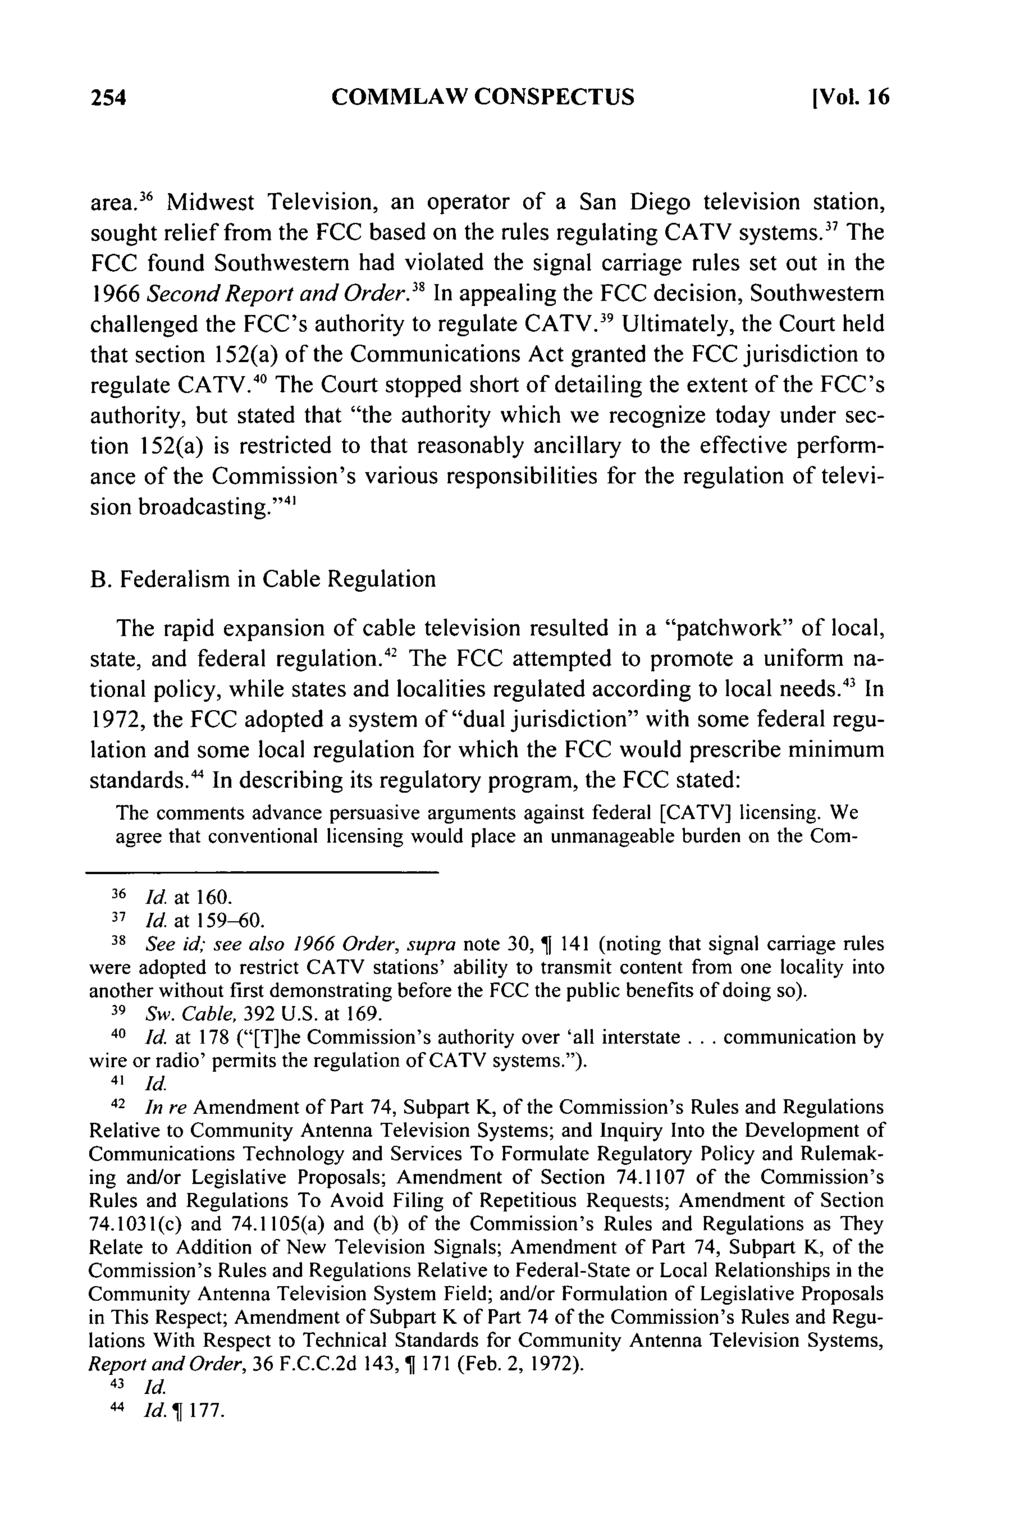 COMMLAW CONSPECTUS [Vol. 16 area.1 6 Midwest Television, an operator of a San Diego television station, sought relief from the FCC based on the rules regulating CATV systems.